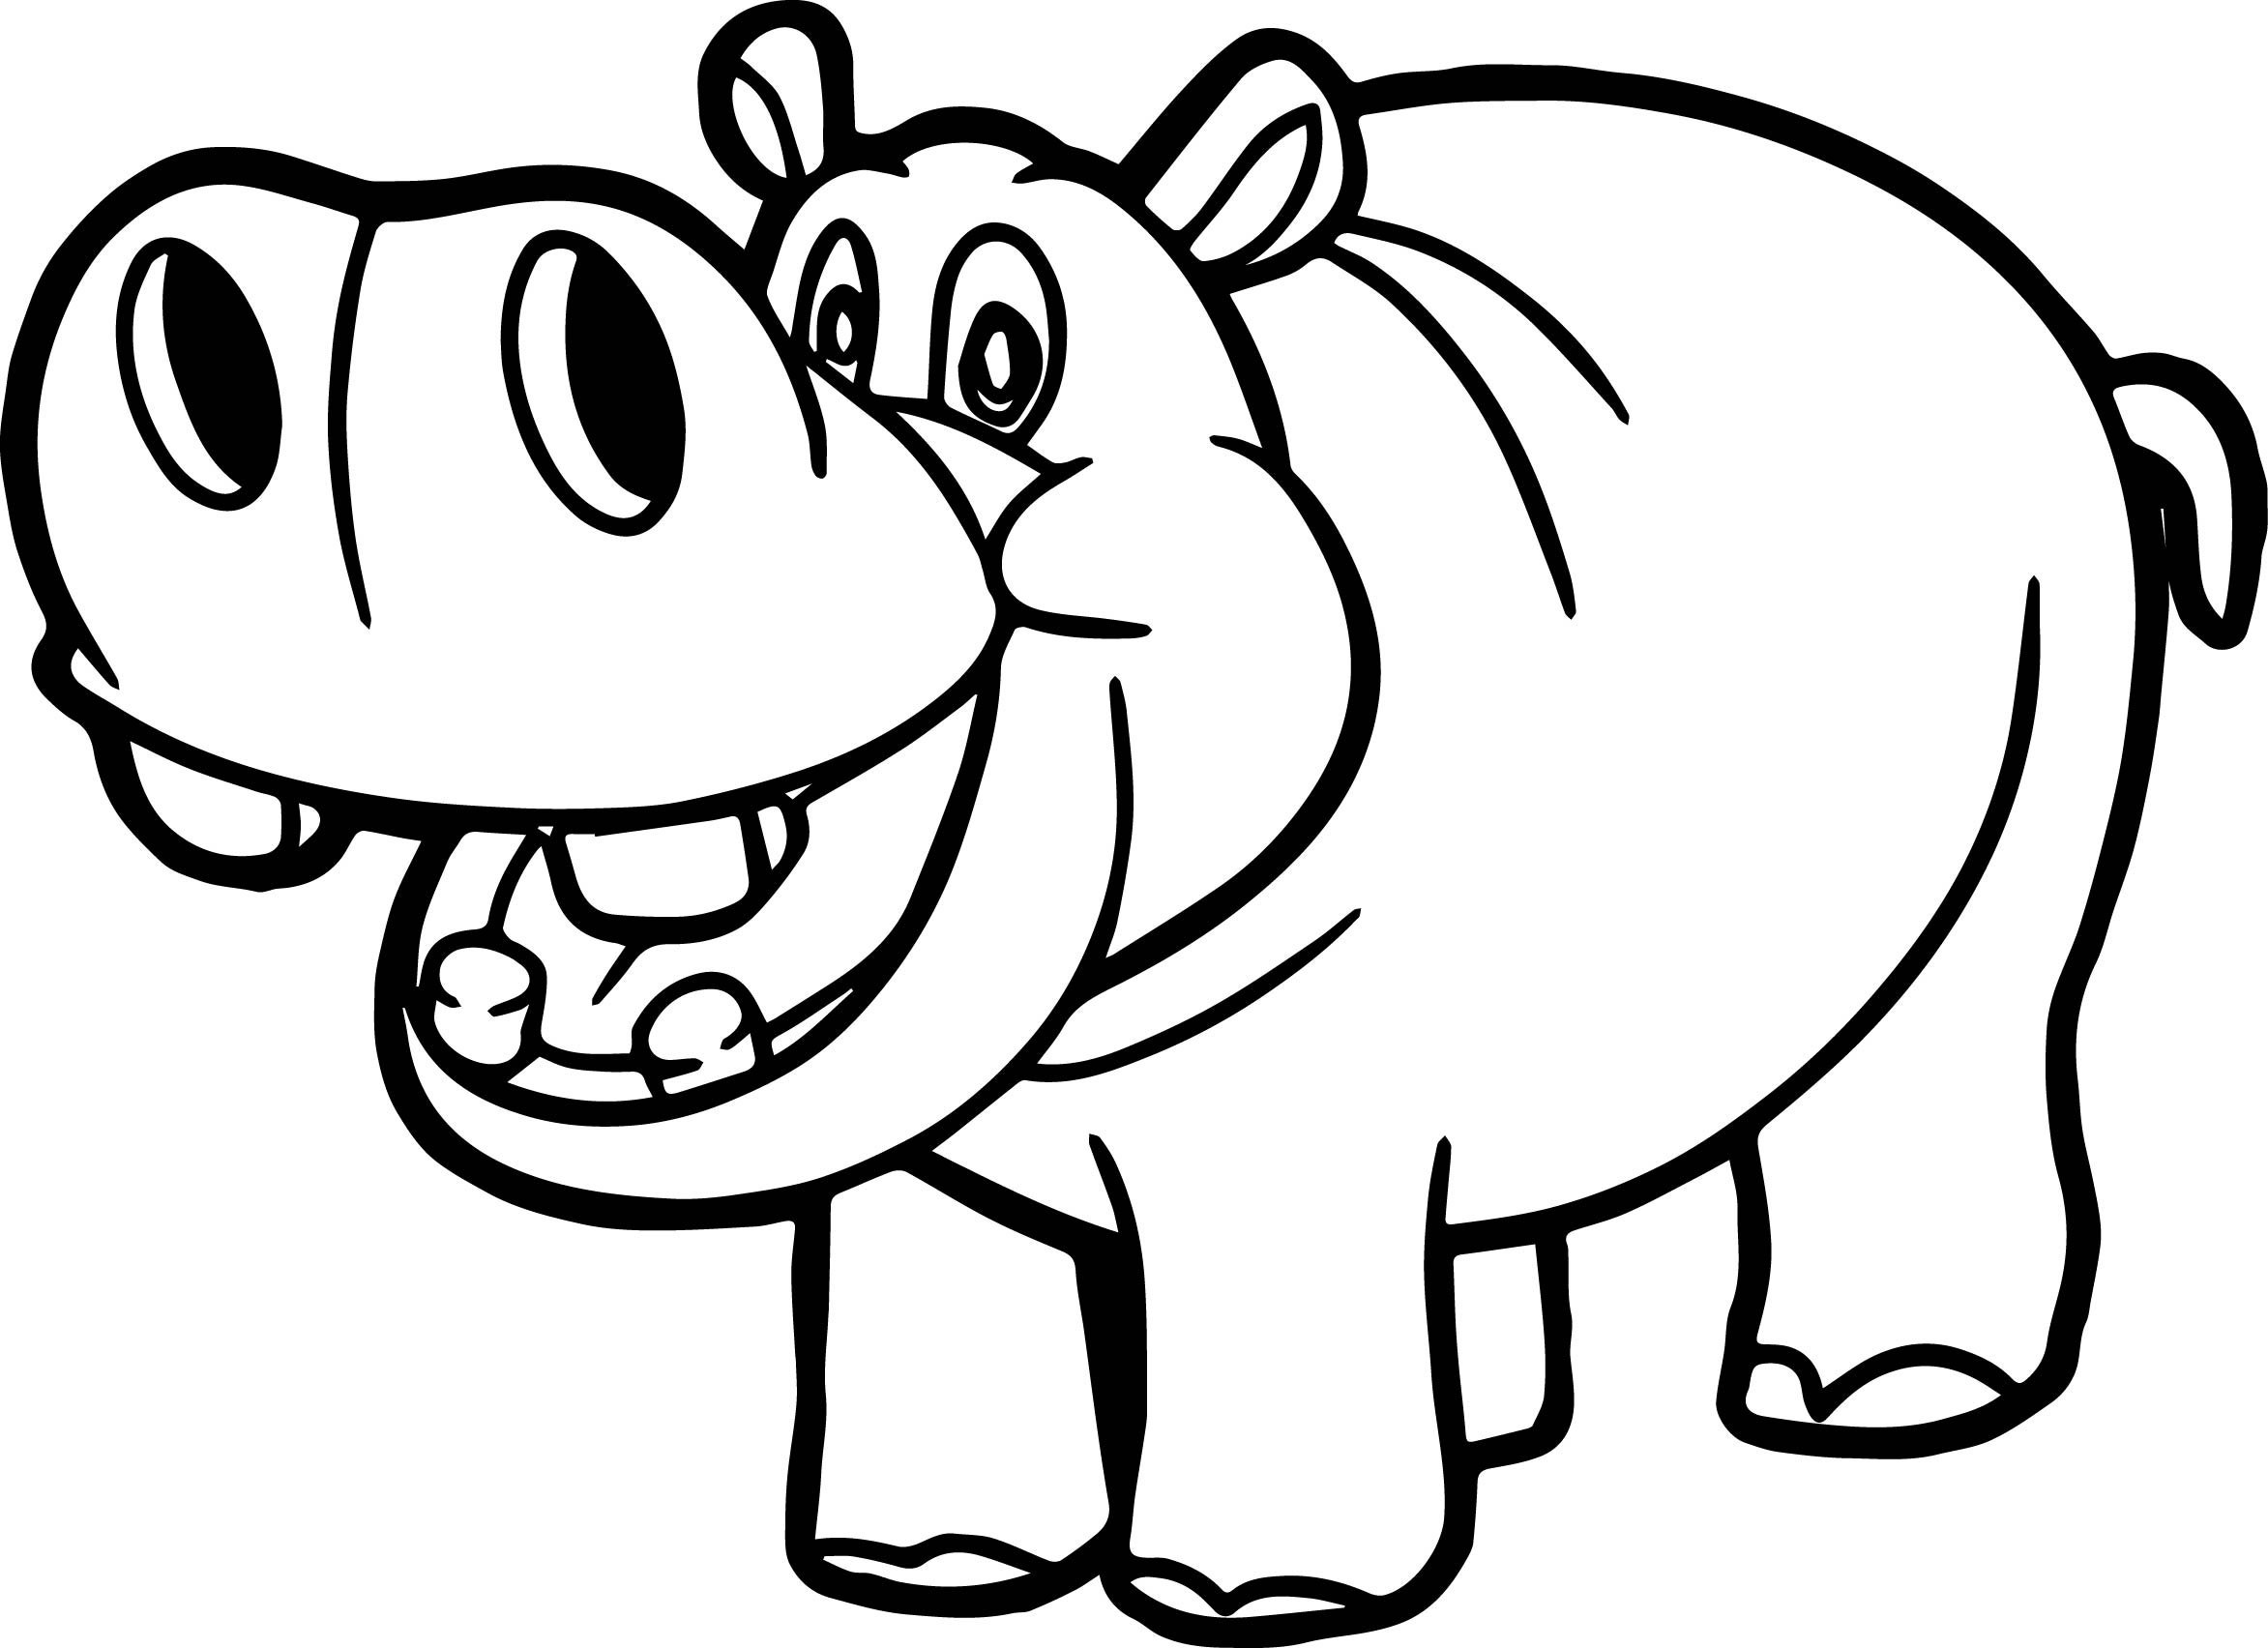 Funny Hippo Smiling Coloring Page - Free Printable Coloring Pages for Kids